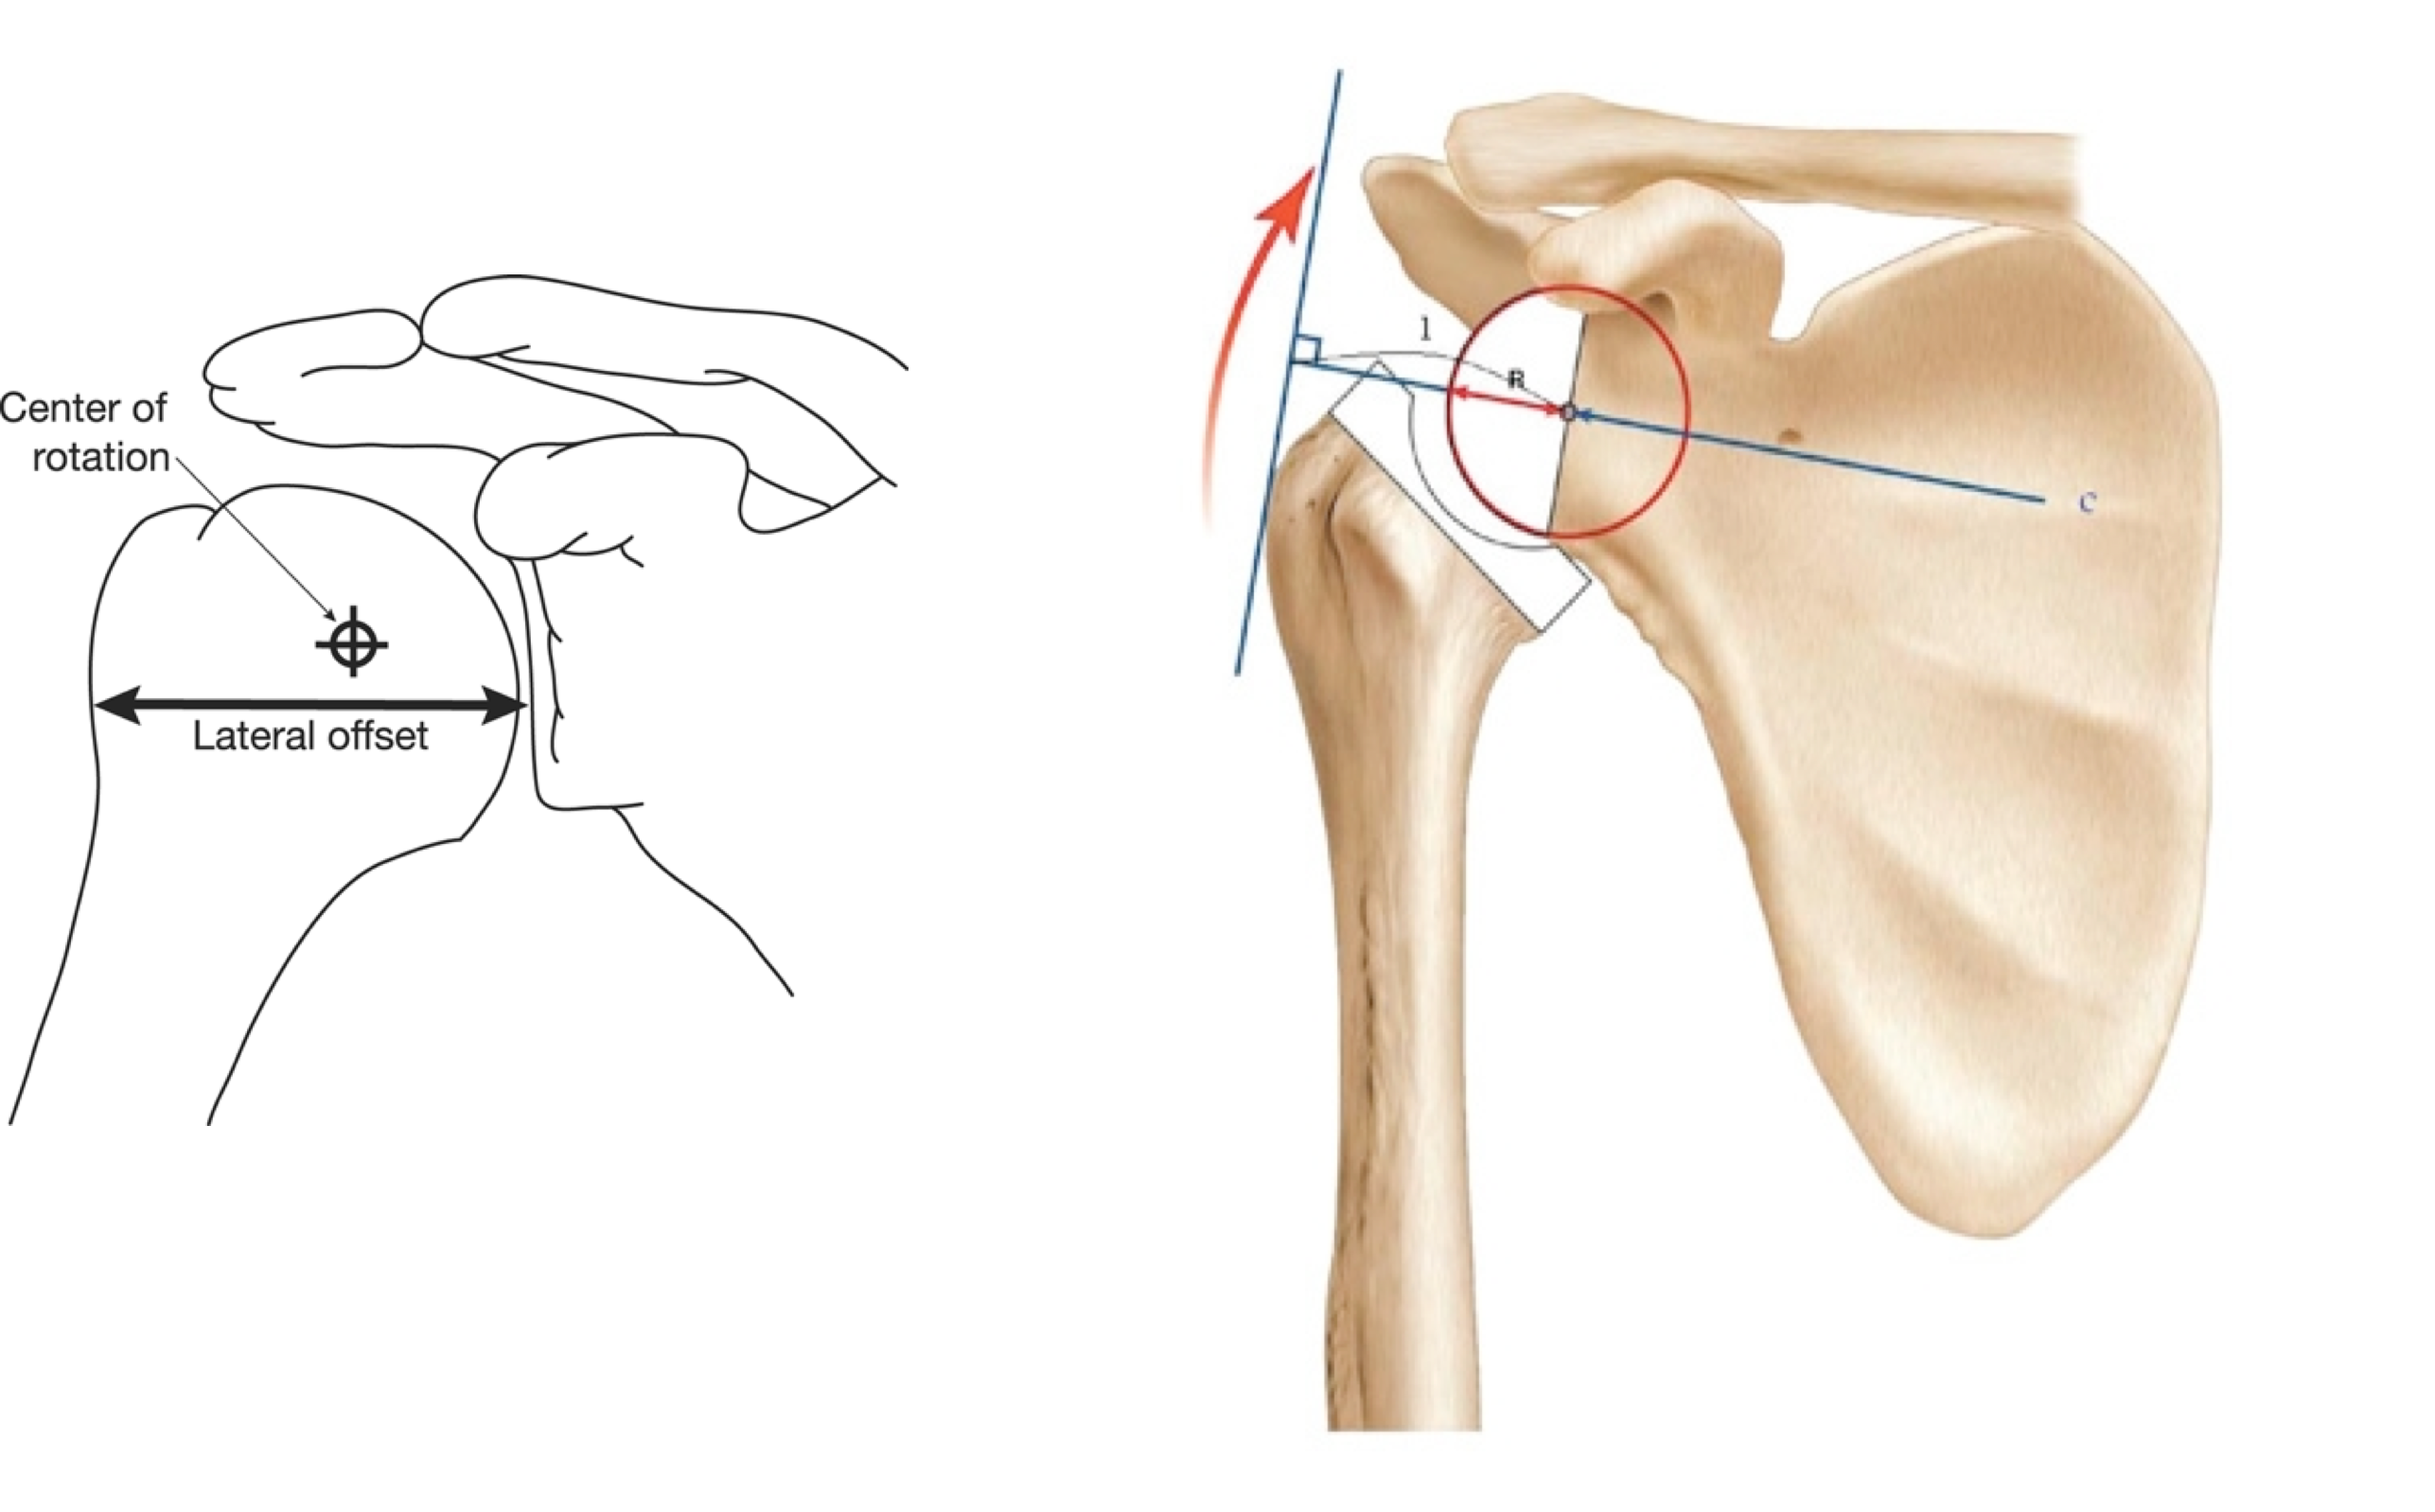 reverse shoulder replacement